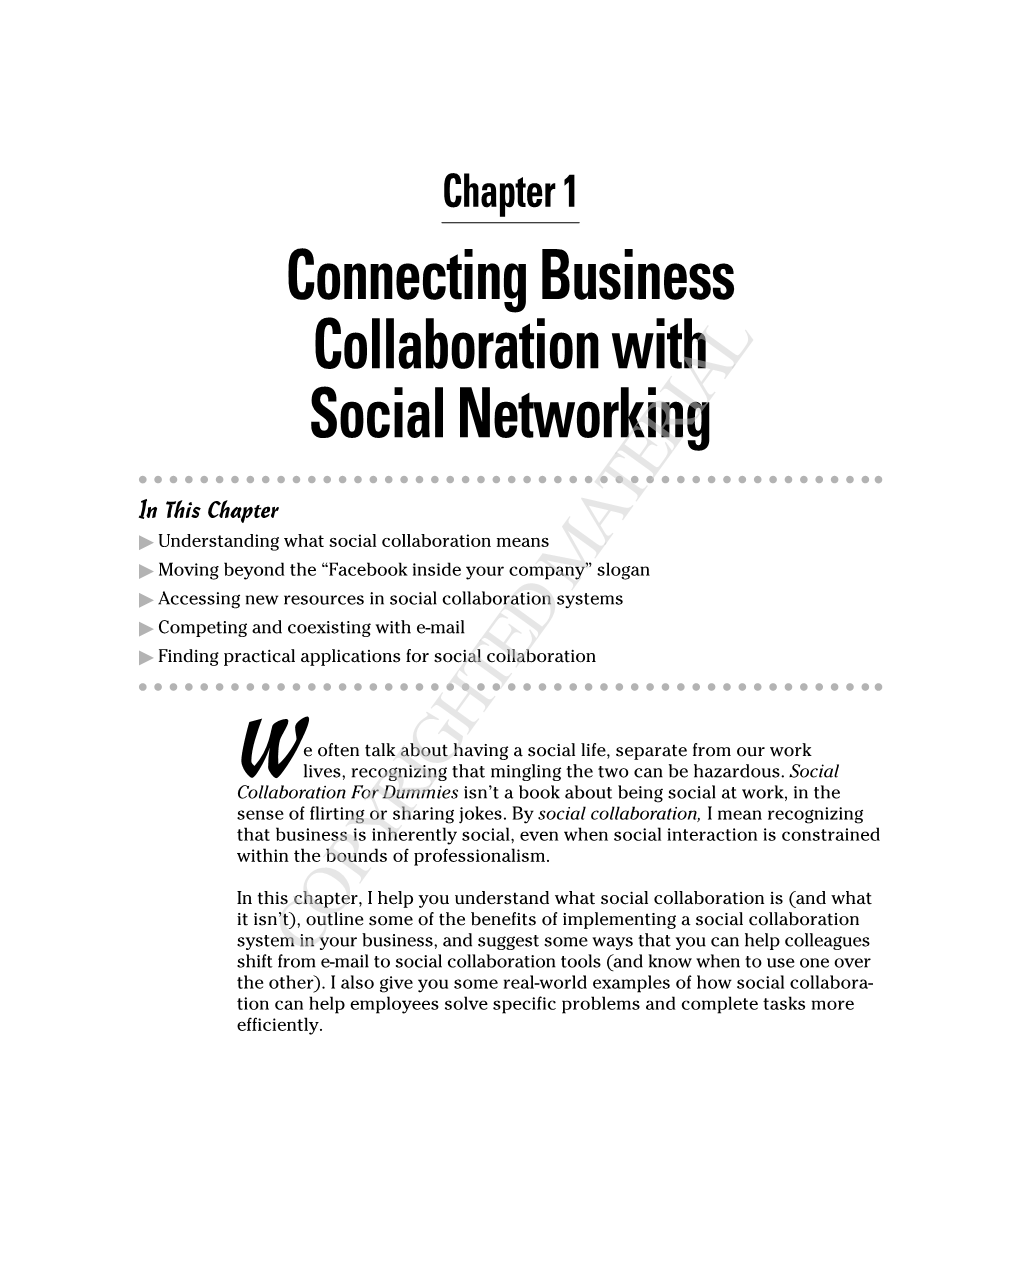 Connecting Business Collaboration with Social Networking